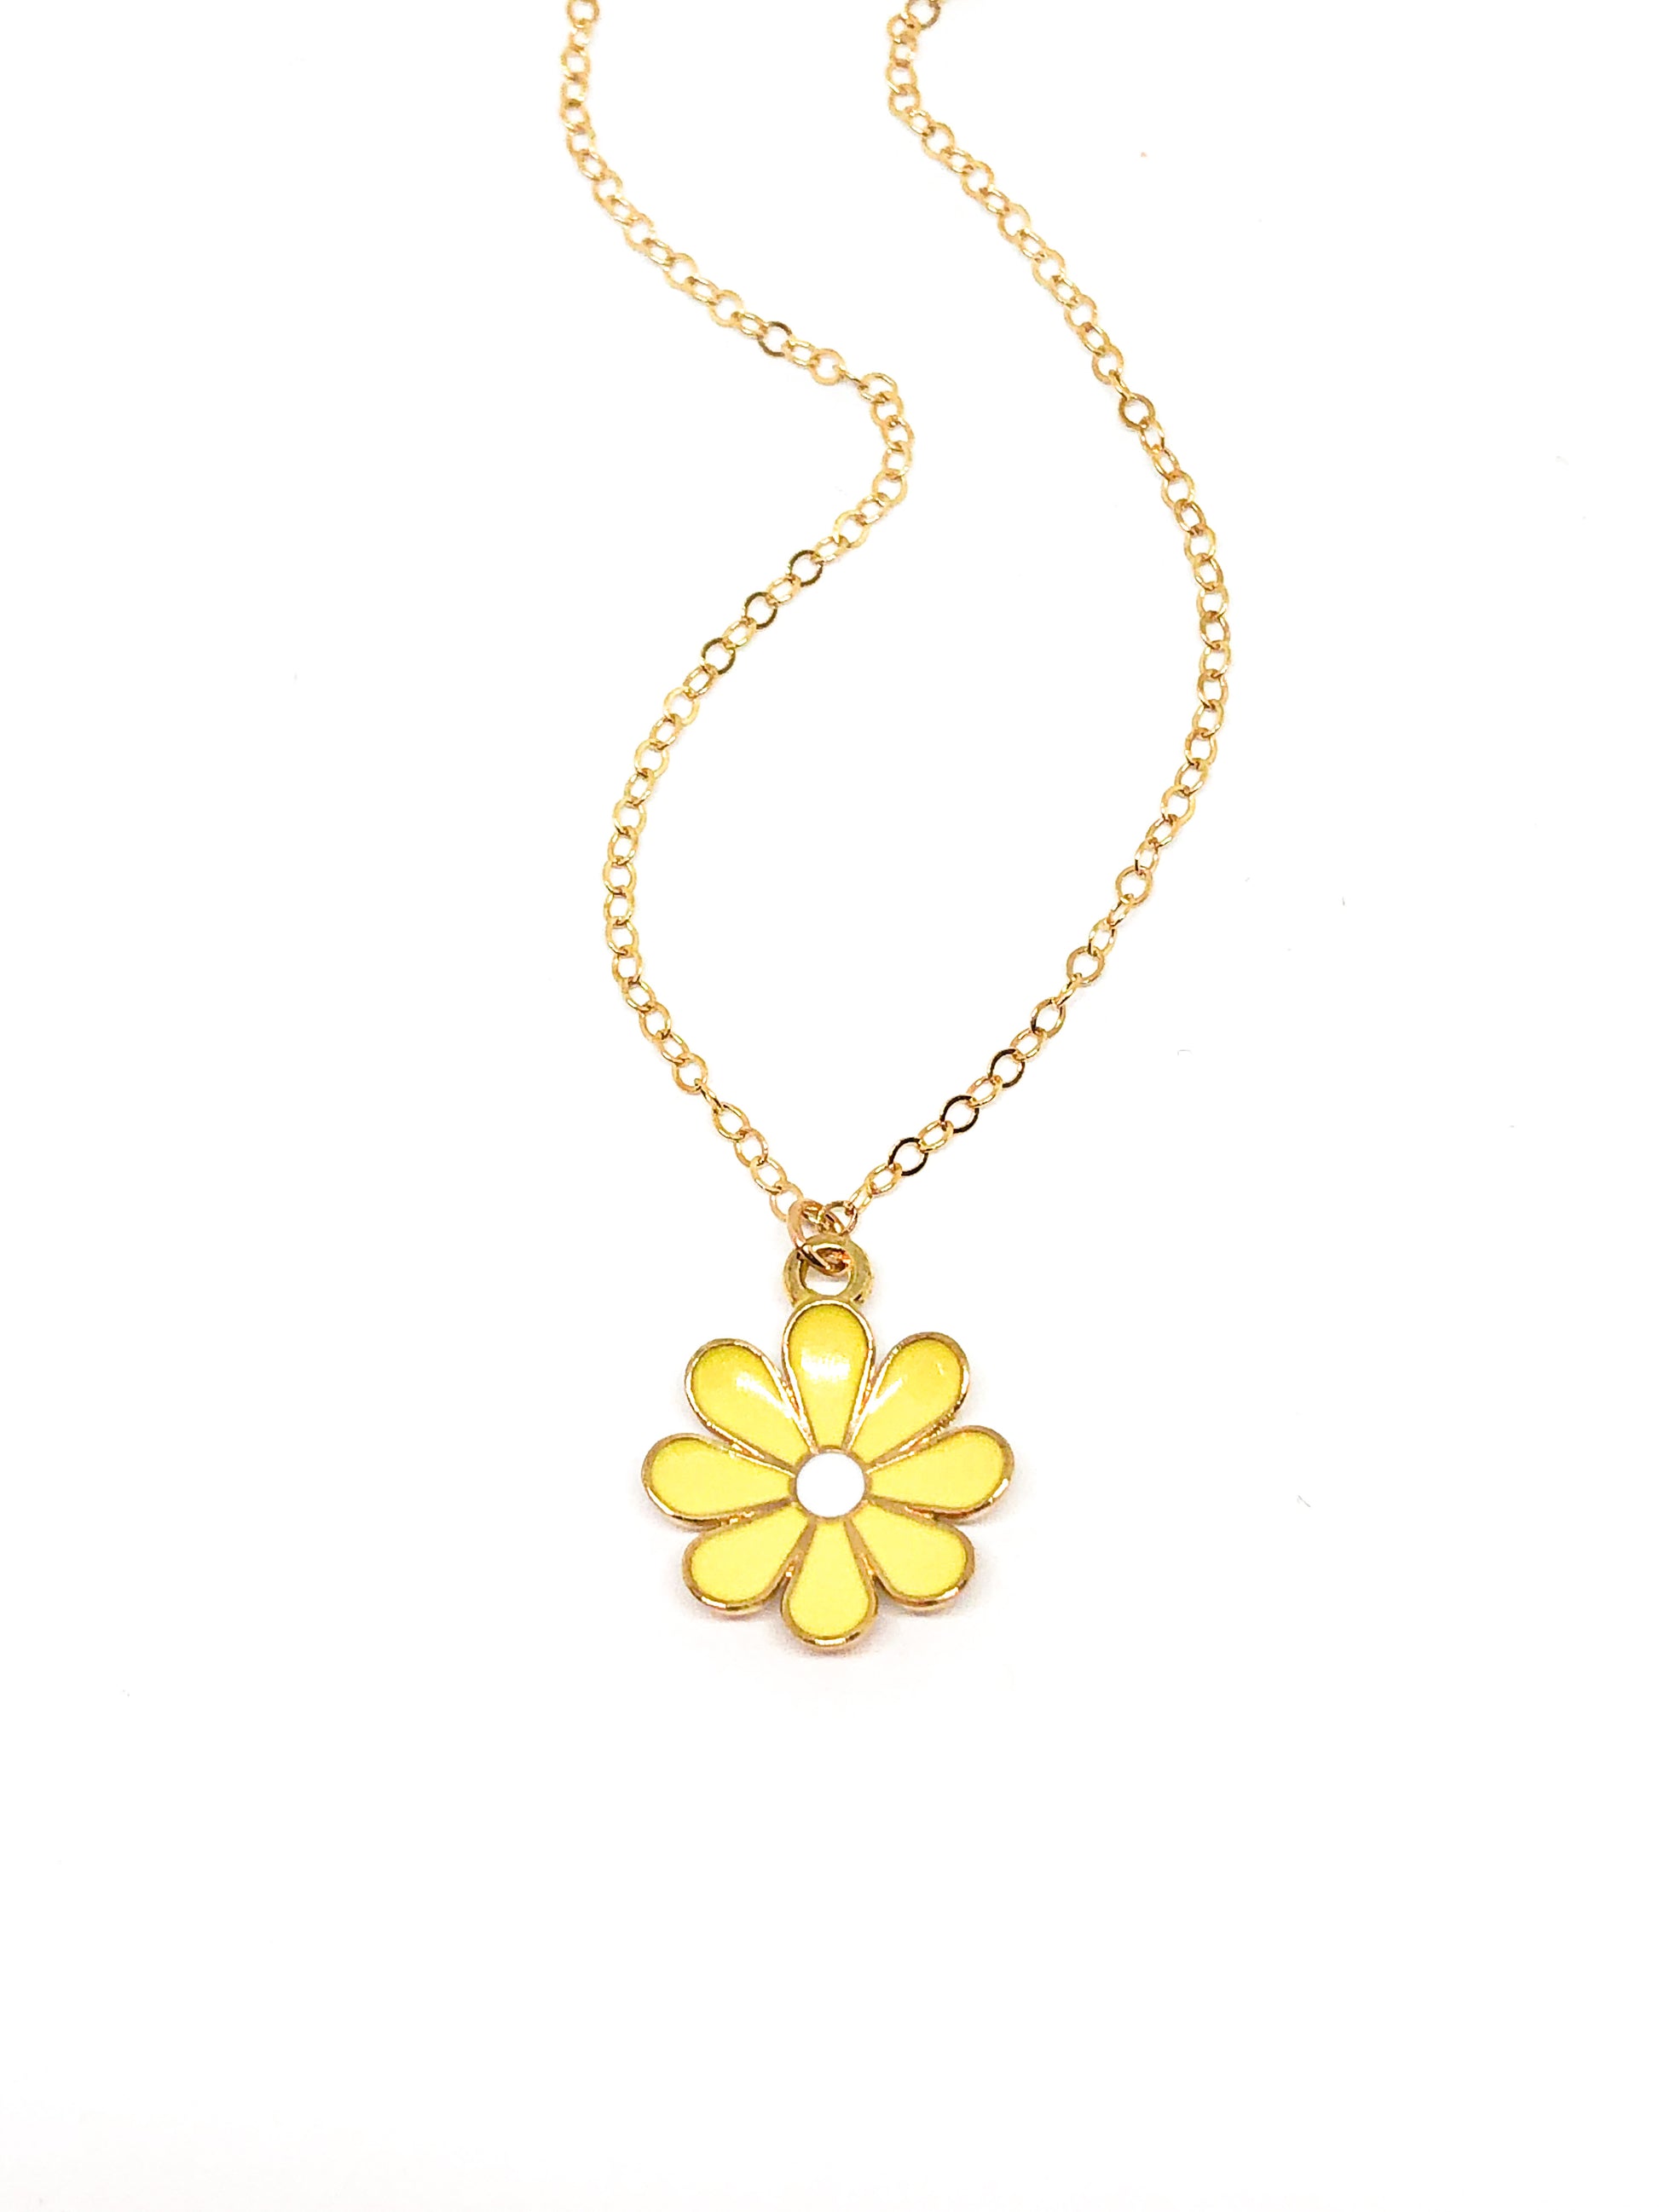 Yellow Flower necklace – Handmade by Elyse